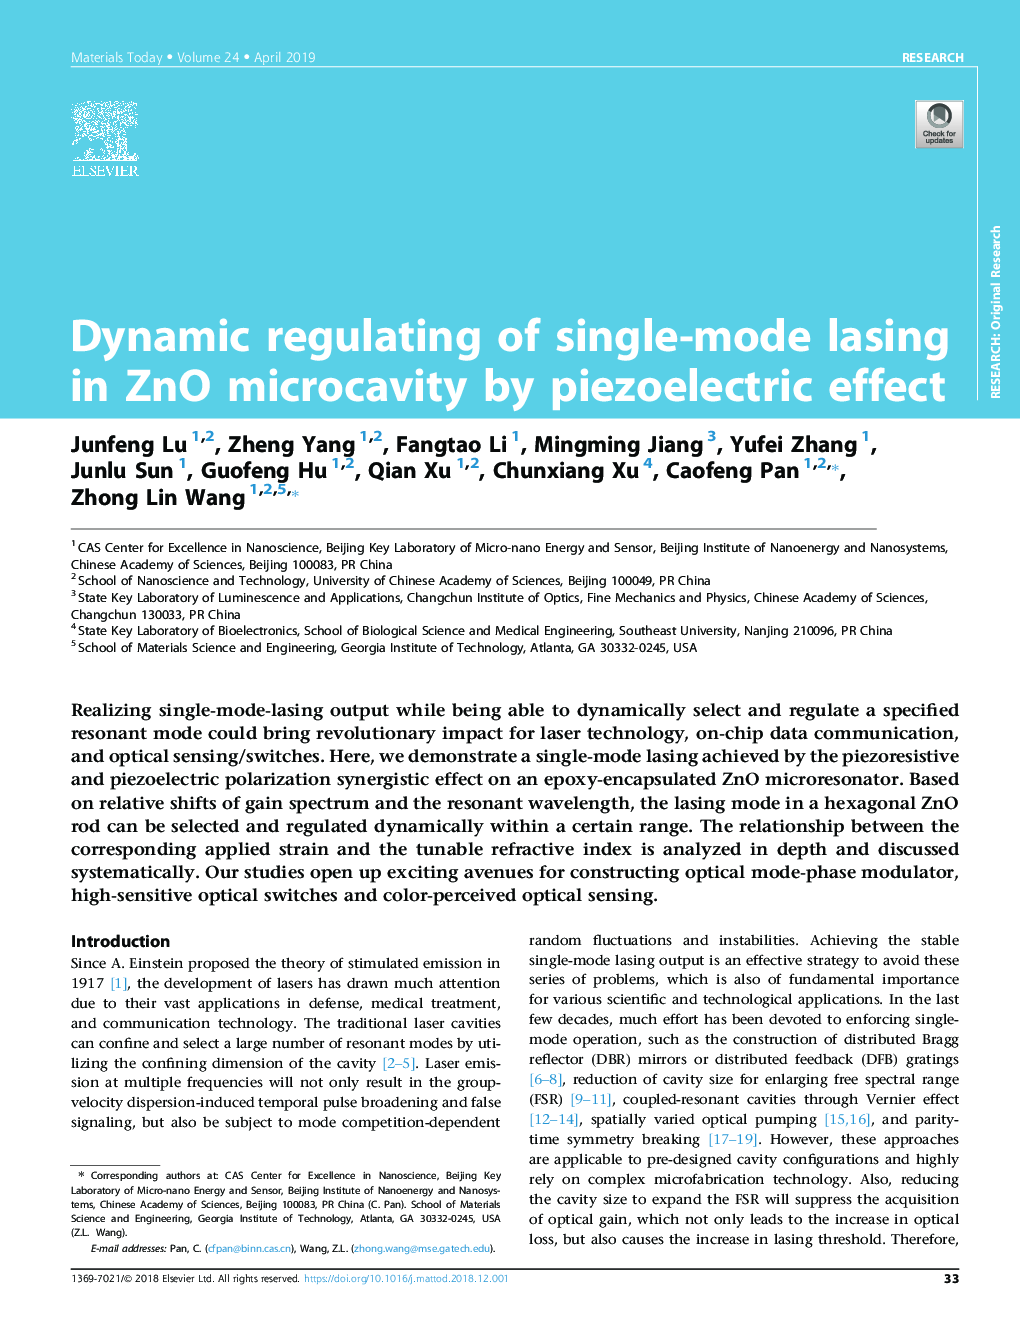 Dynamic regulating of single-mode lasing in ZnO microcavity by piezoelectric effect